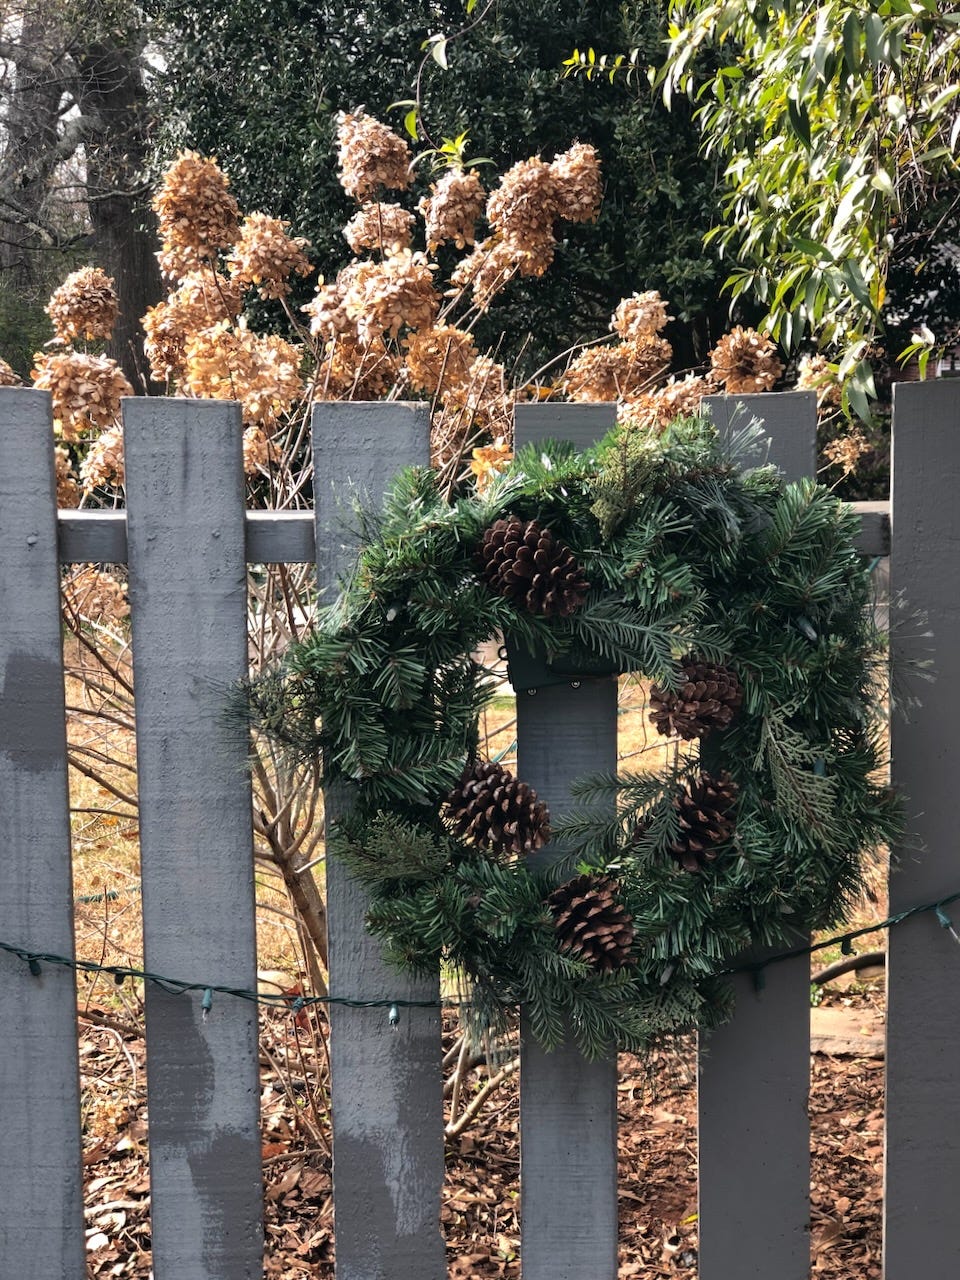 Wreath with pine cones hung on fence. Dried hydrangea in background